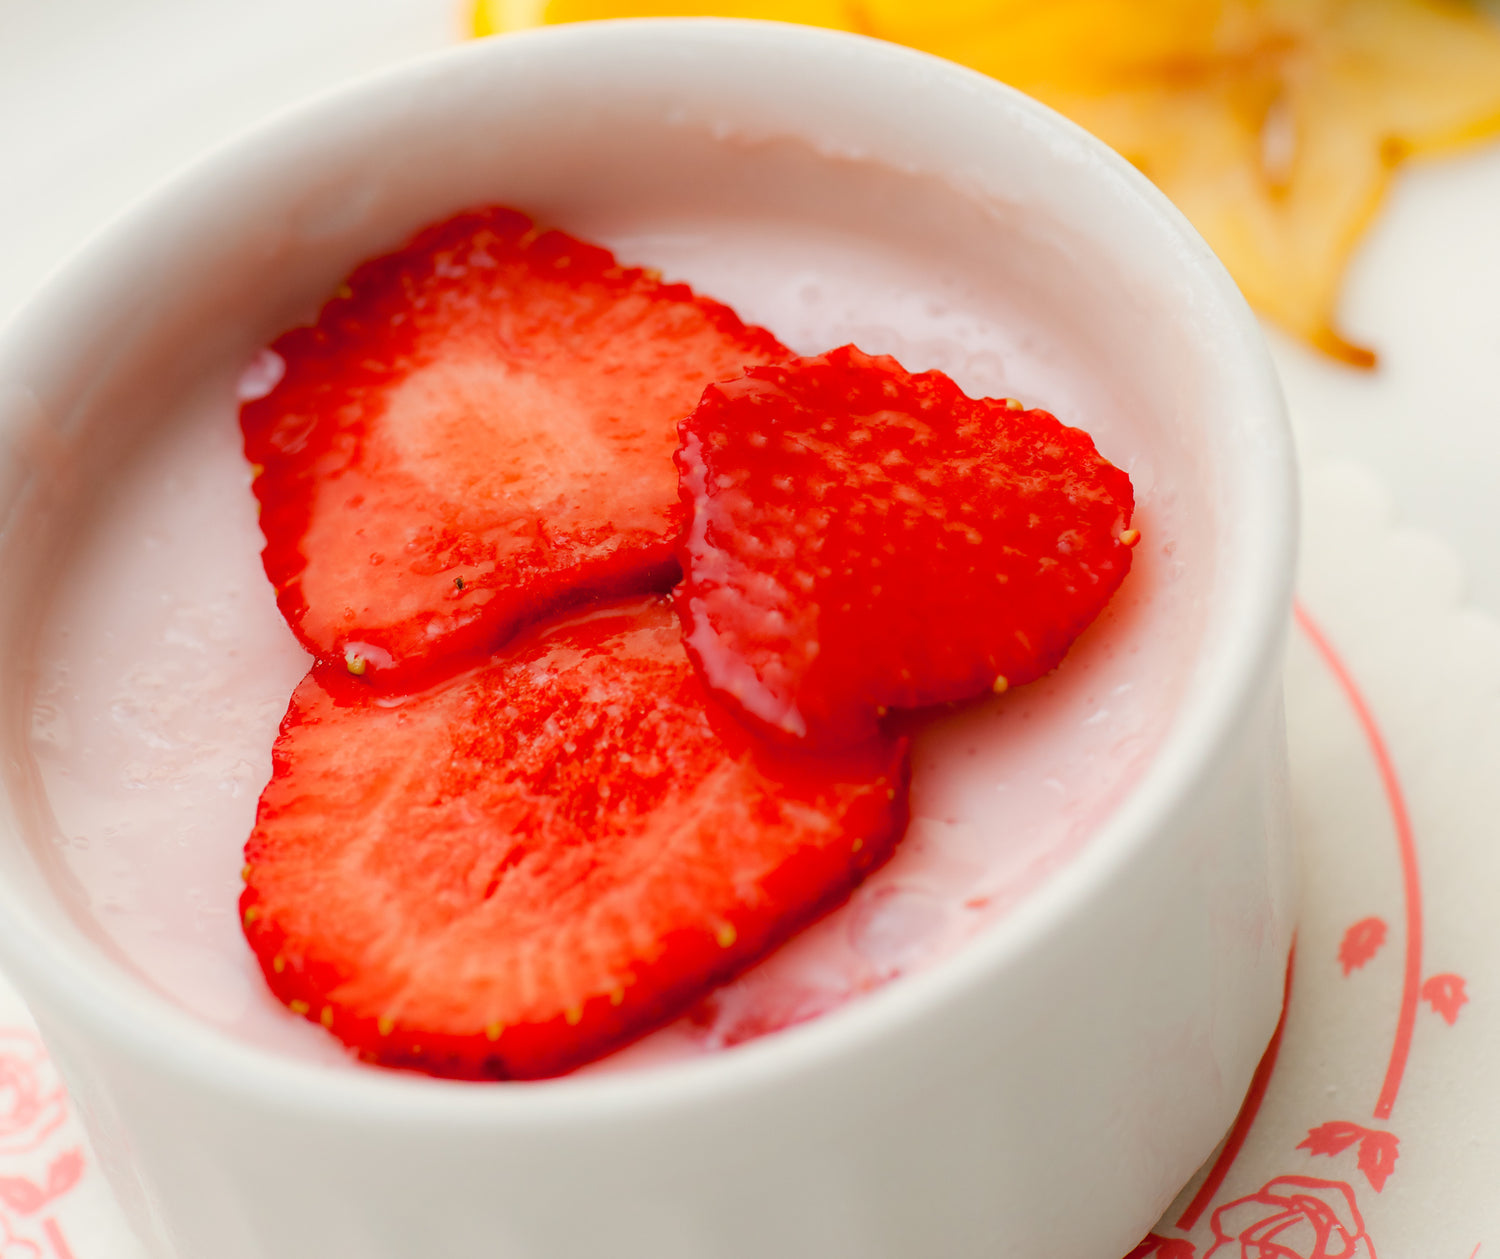 Healing Meals - Strawberry Panna Cotta Easy Healthy Recipe